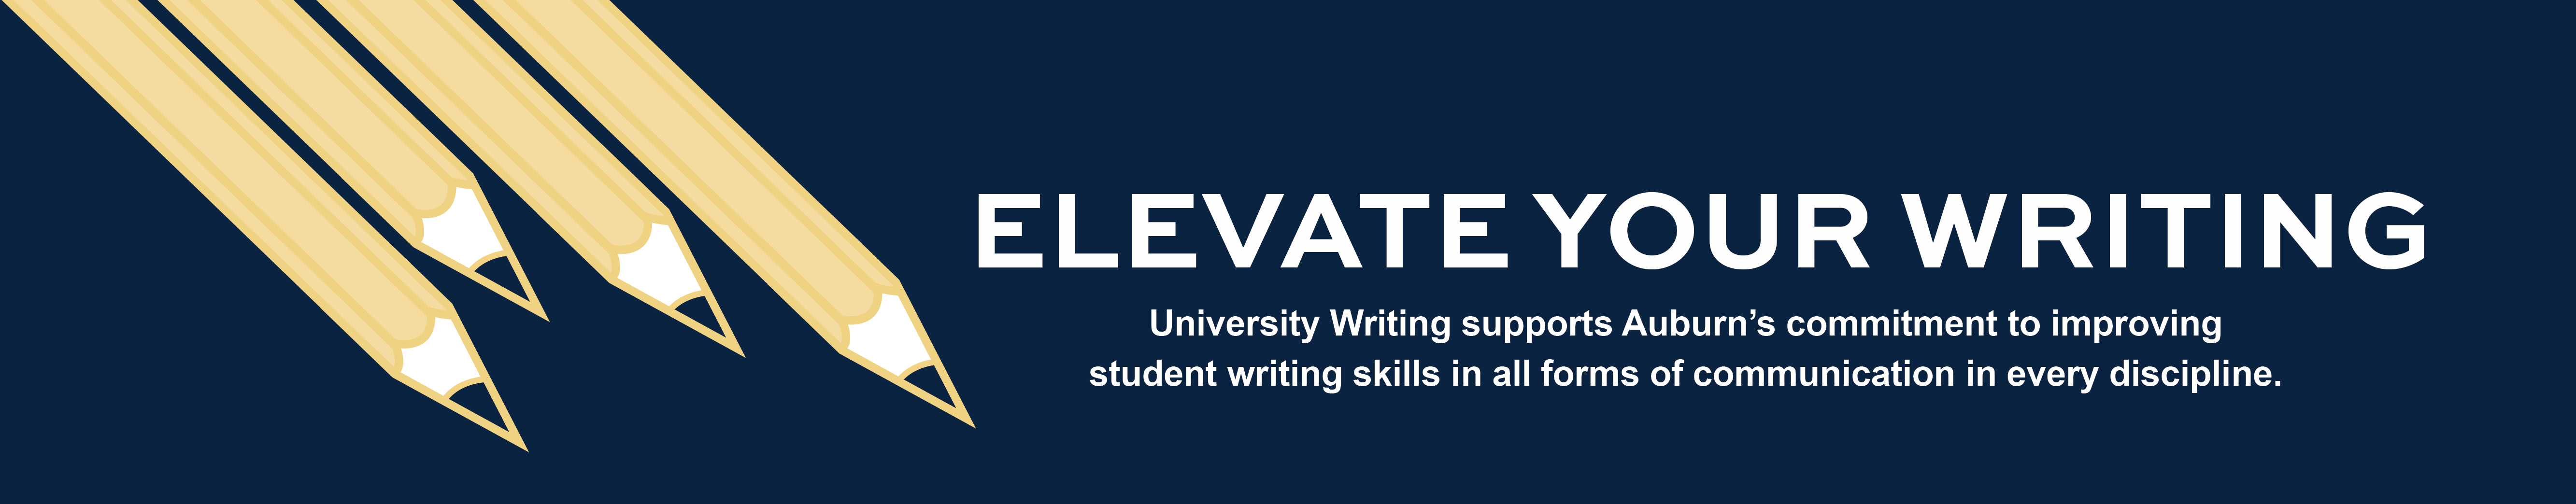 Elevate Your Writing